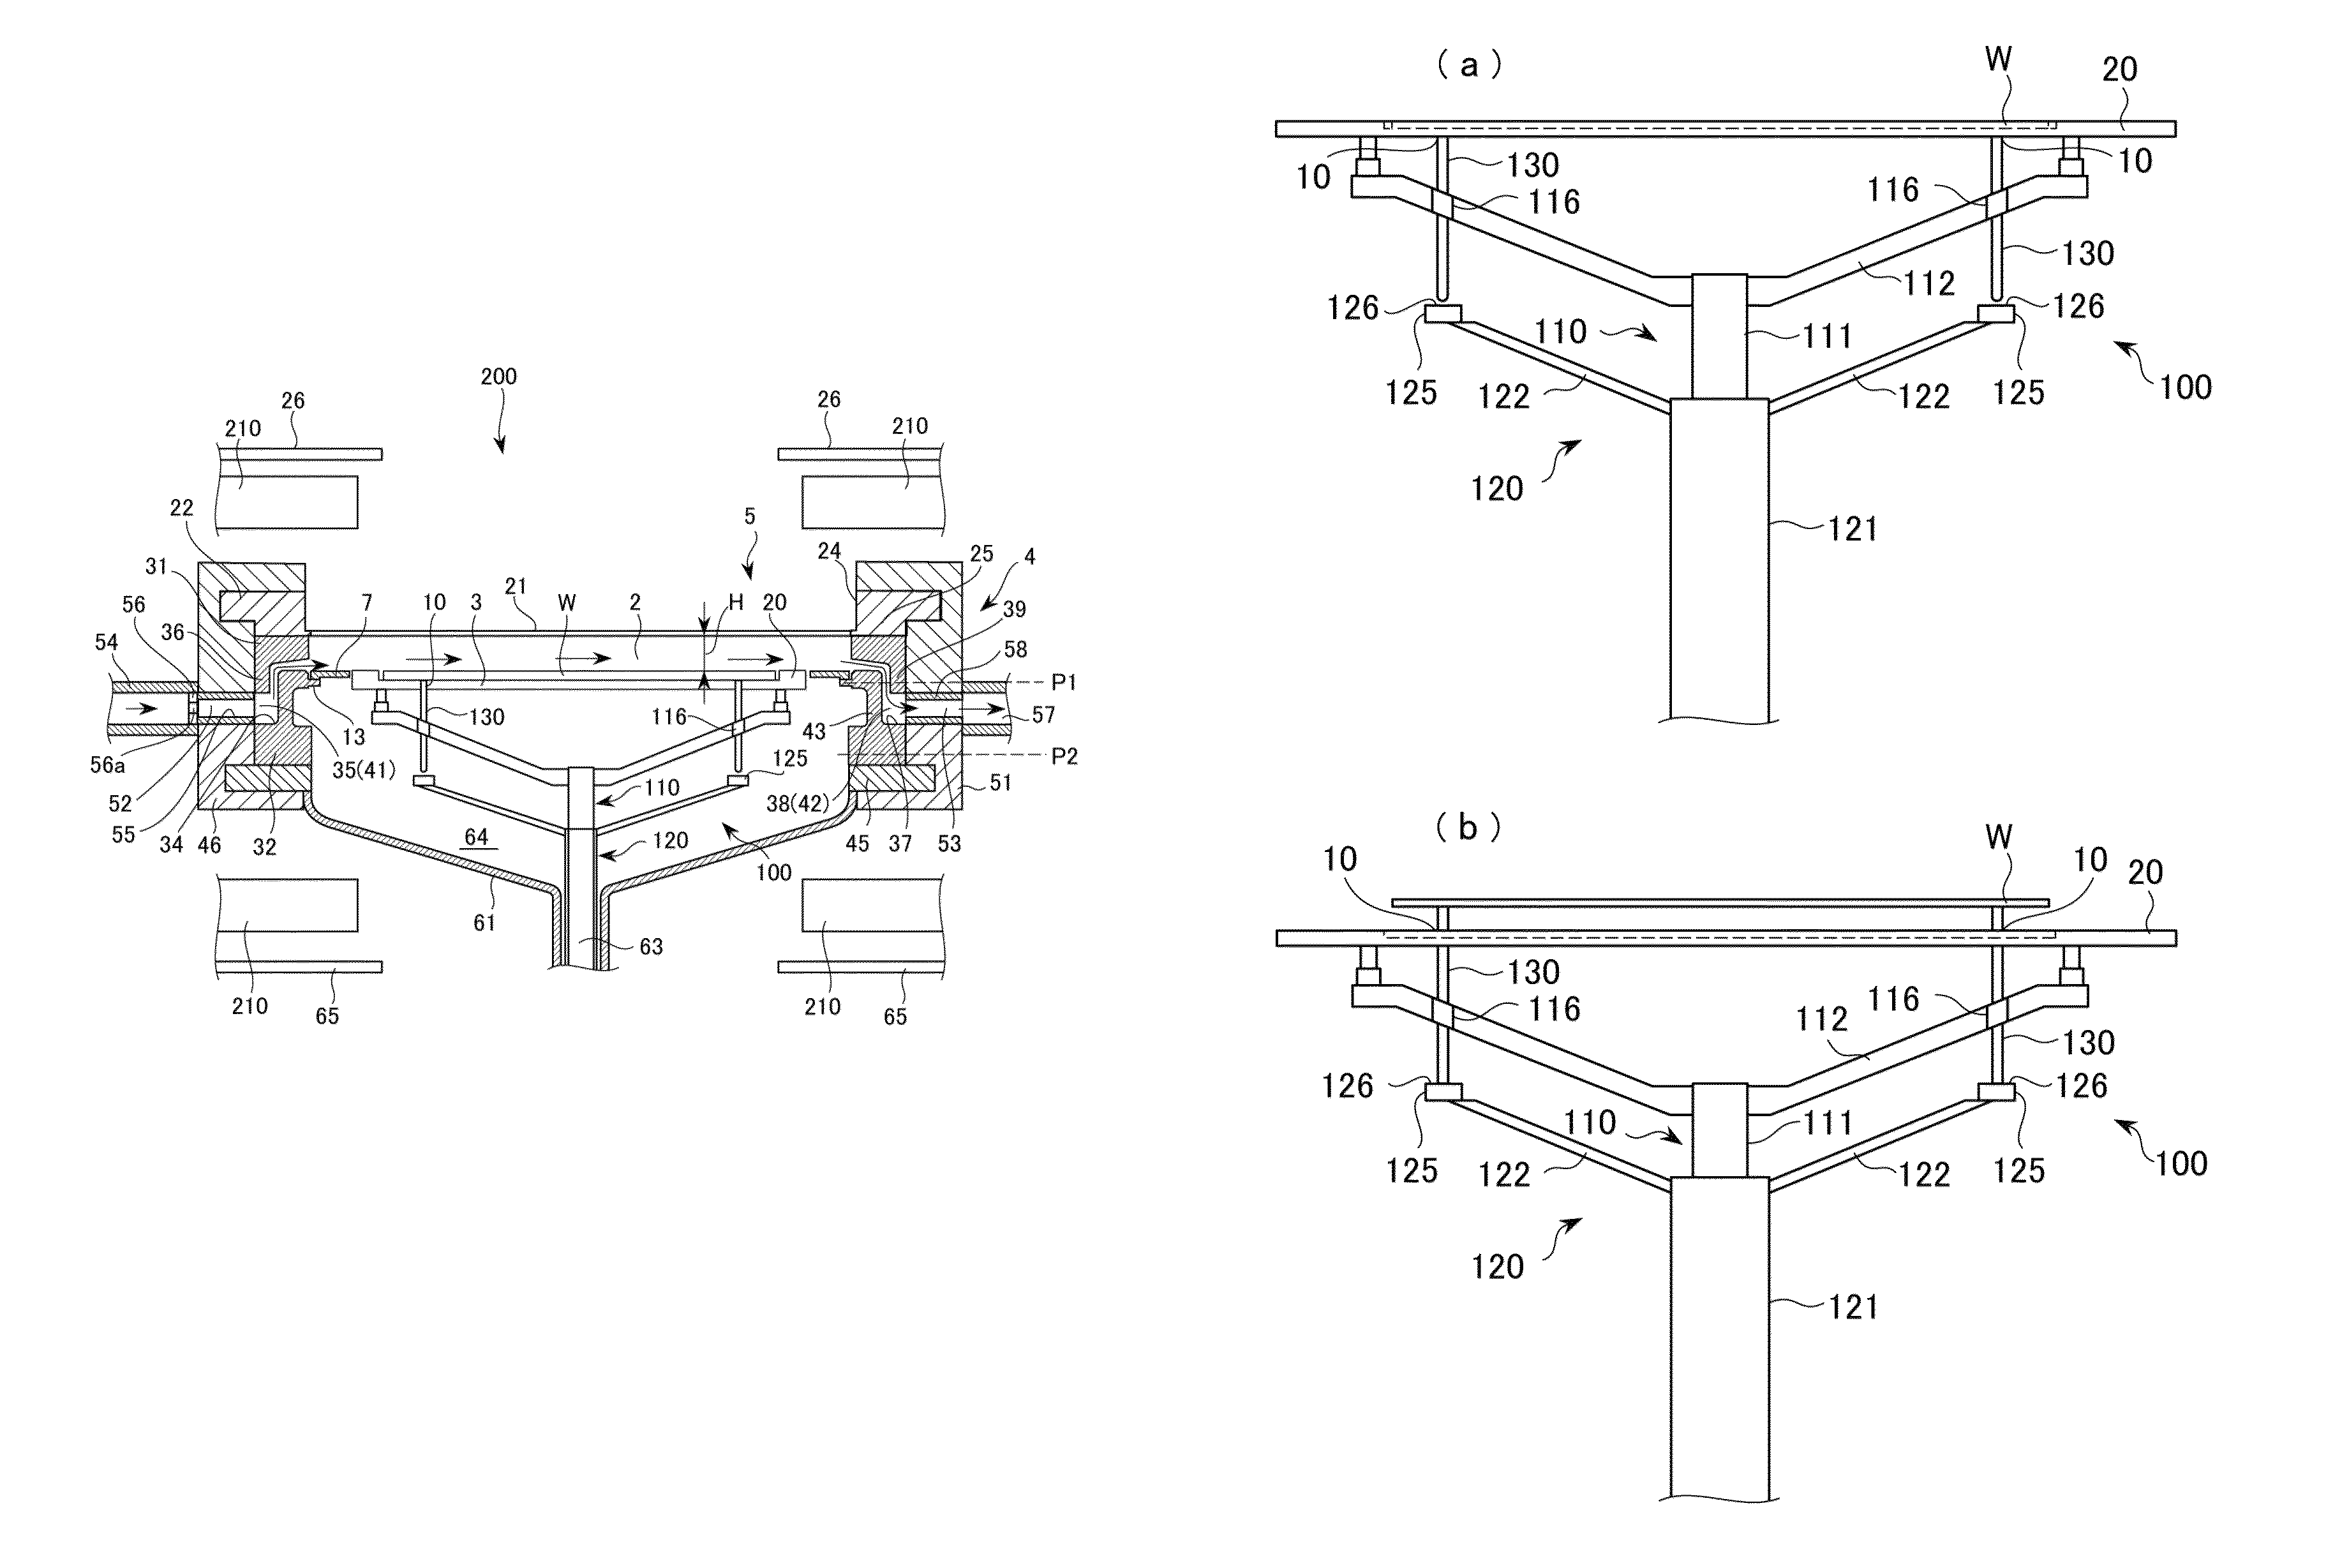 Susceptor support portion and epitaxial growth apparatus including susceptor support portion